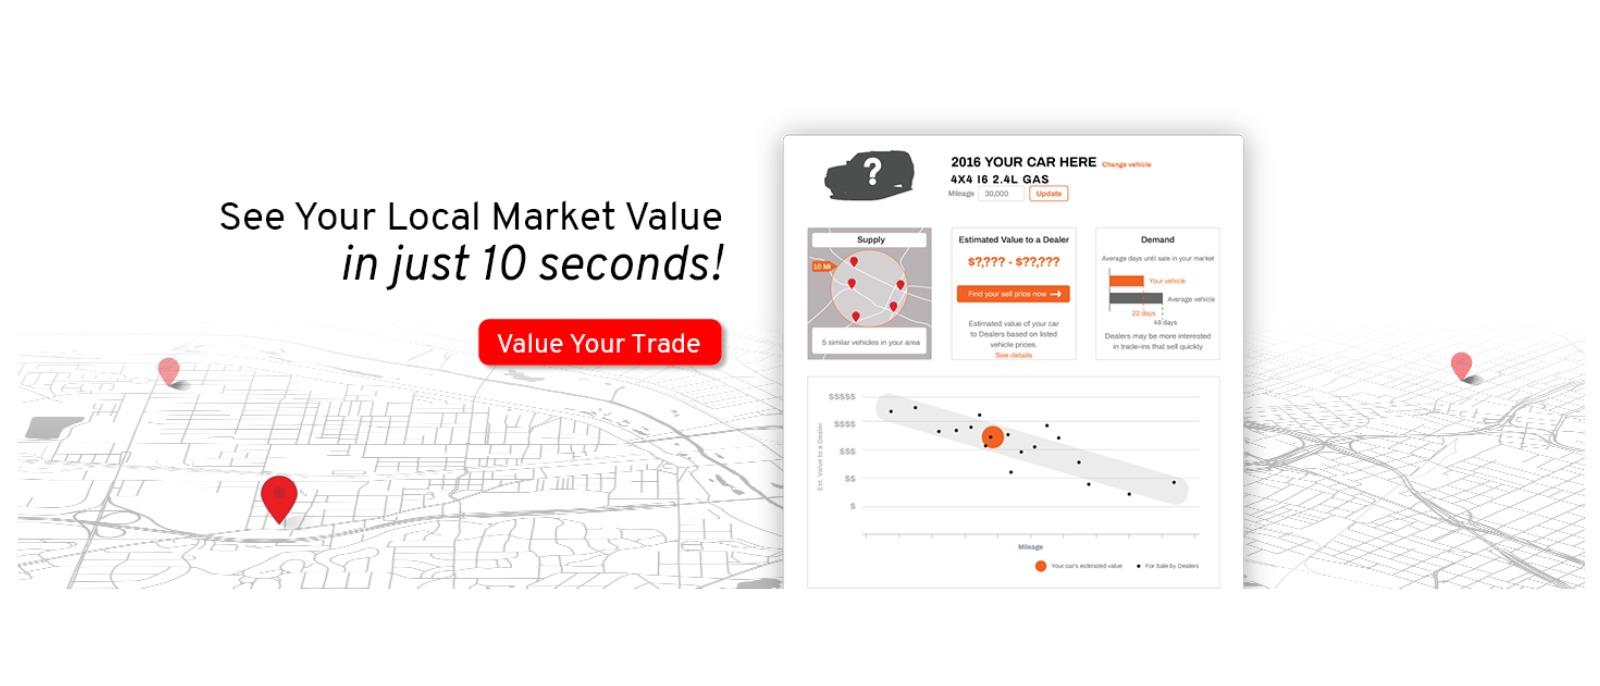 See Your Local Market Value in just 10 seconds!